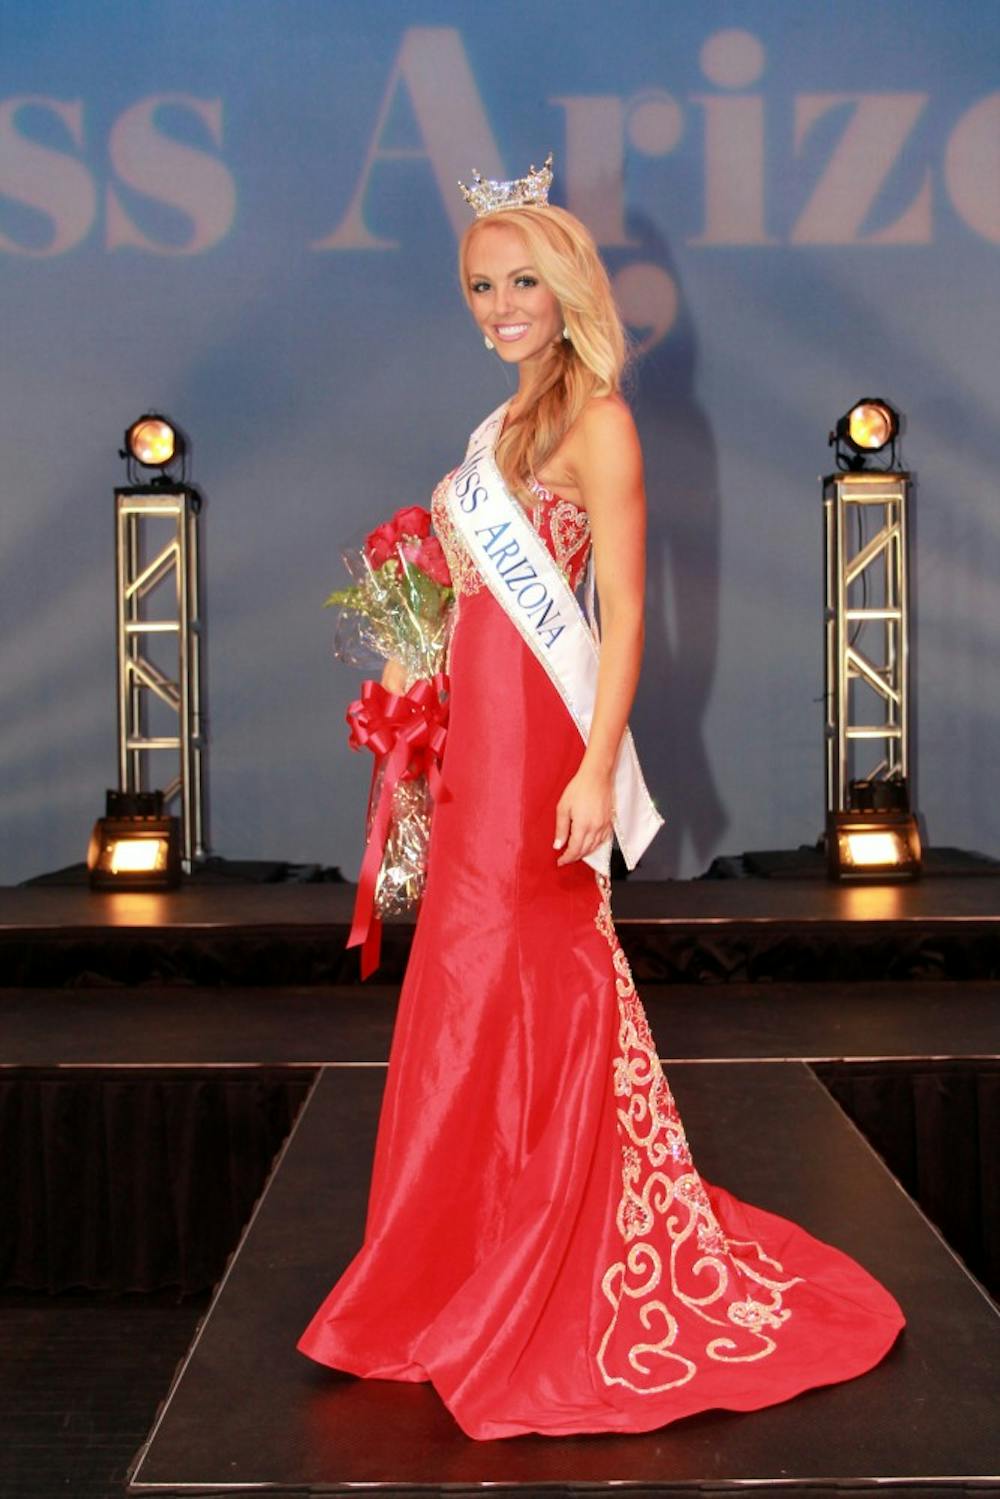 ASU alumna Alexa Rogers was crowned Miss Arizona 2014 and is now eligible to compete in the Miss America pageant. (Photo courtesy of Wayne Lundeberg)